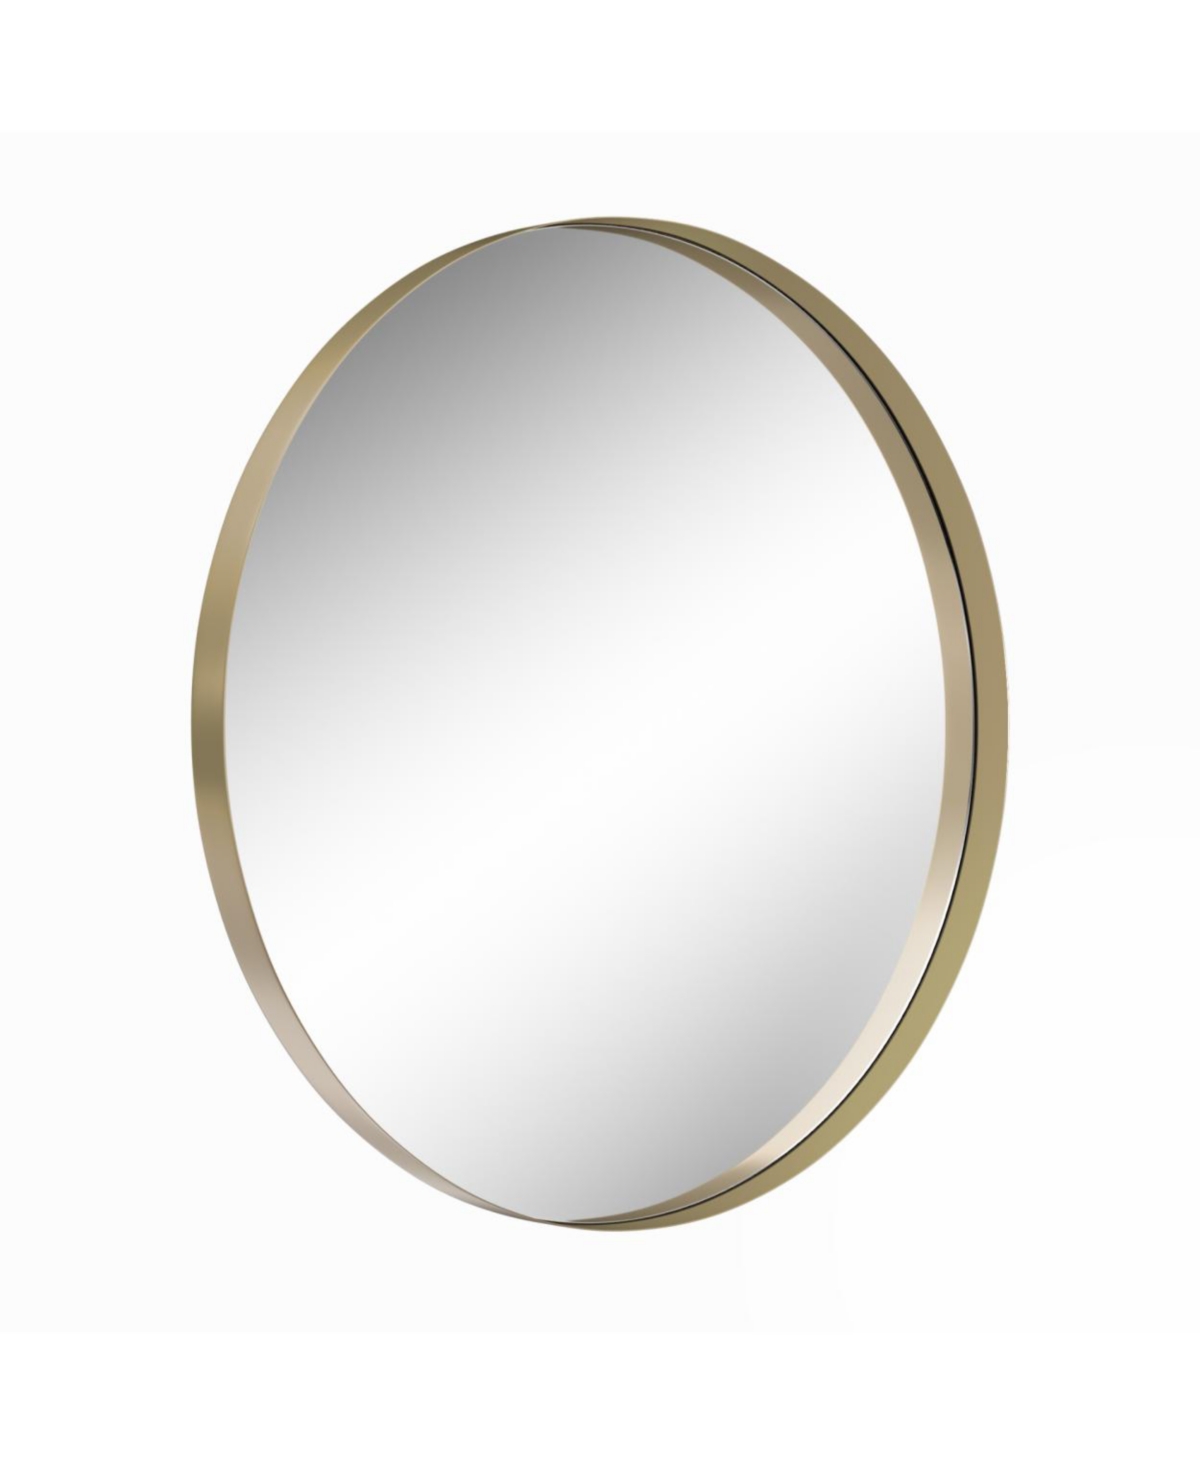 Metal Round Wall Mirror 0003 - Gold